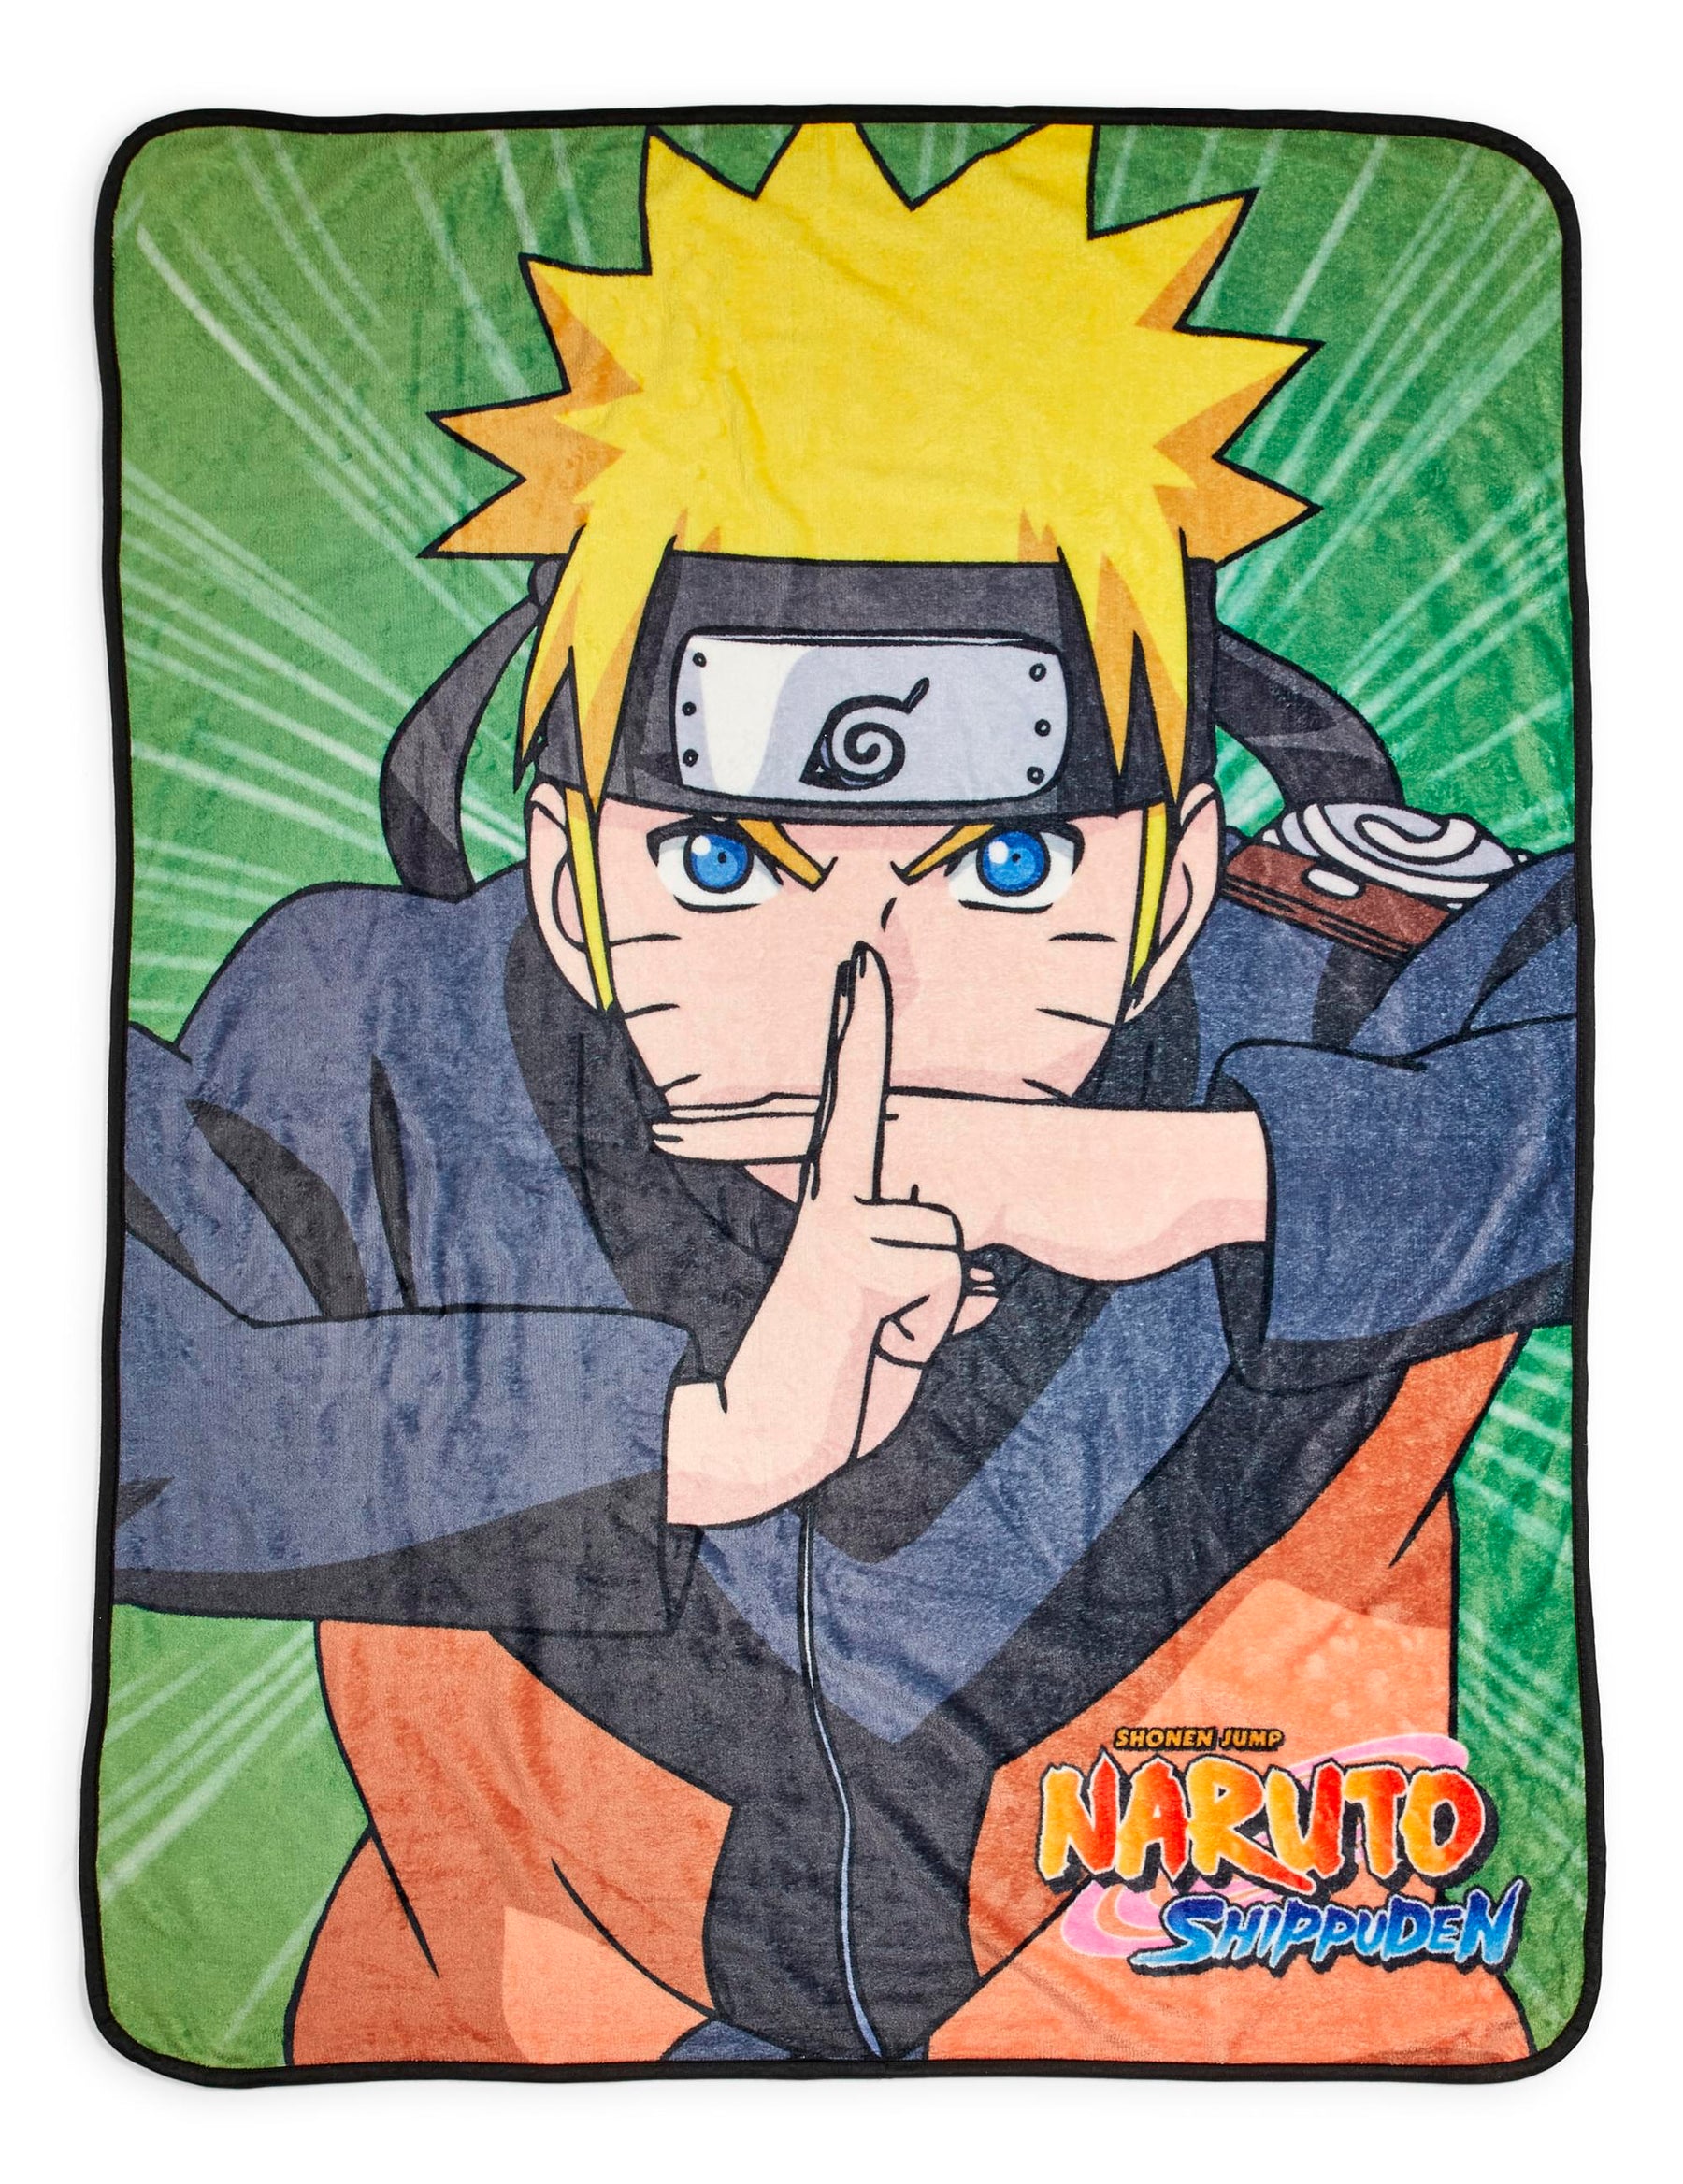 Naruto Shippuden LookSee Collector's Box | Includes 5 Naruto Themed Collectibles